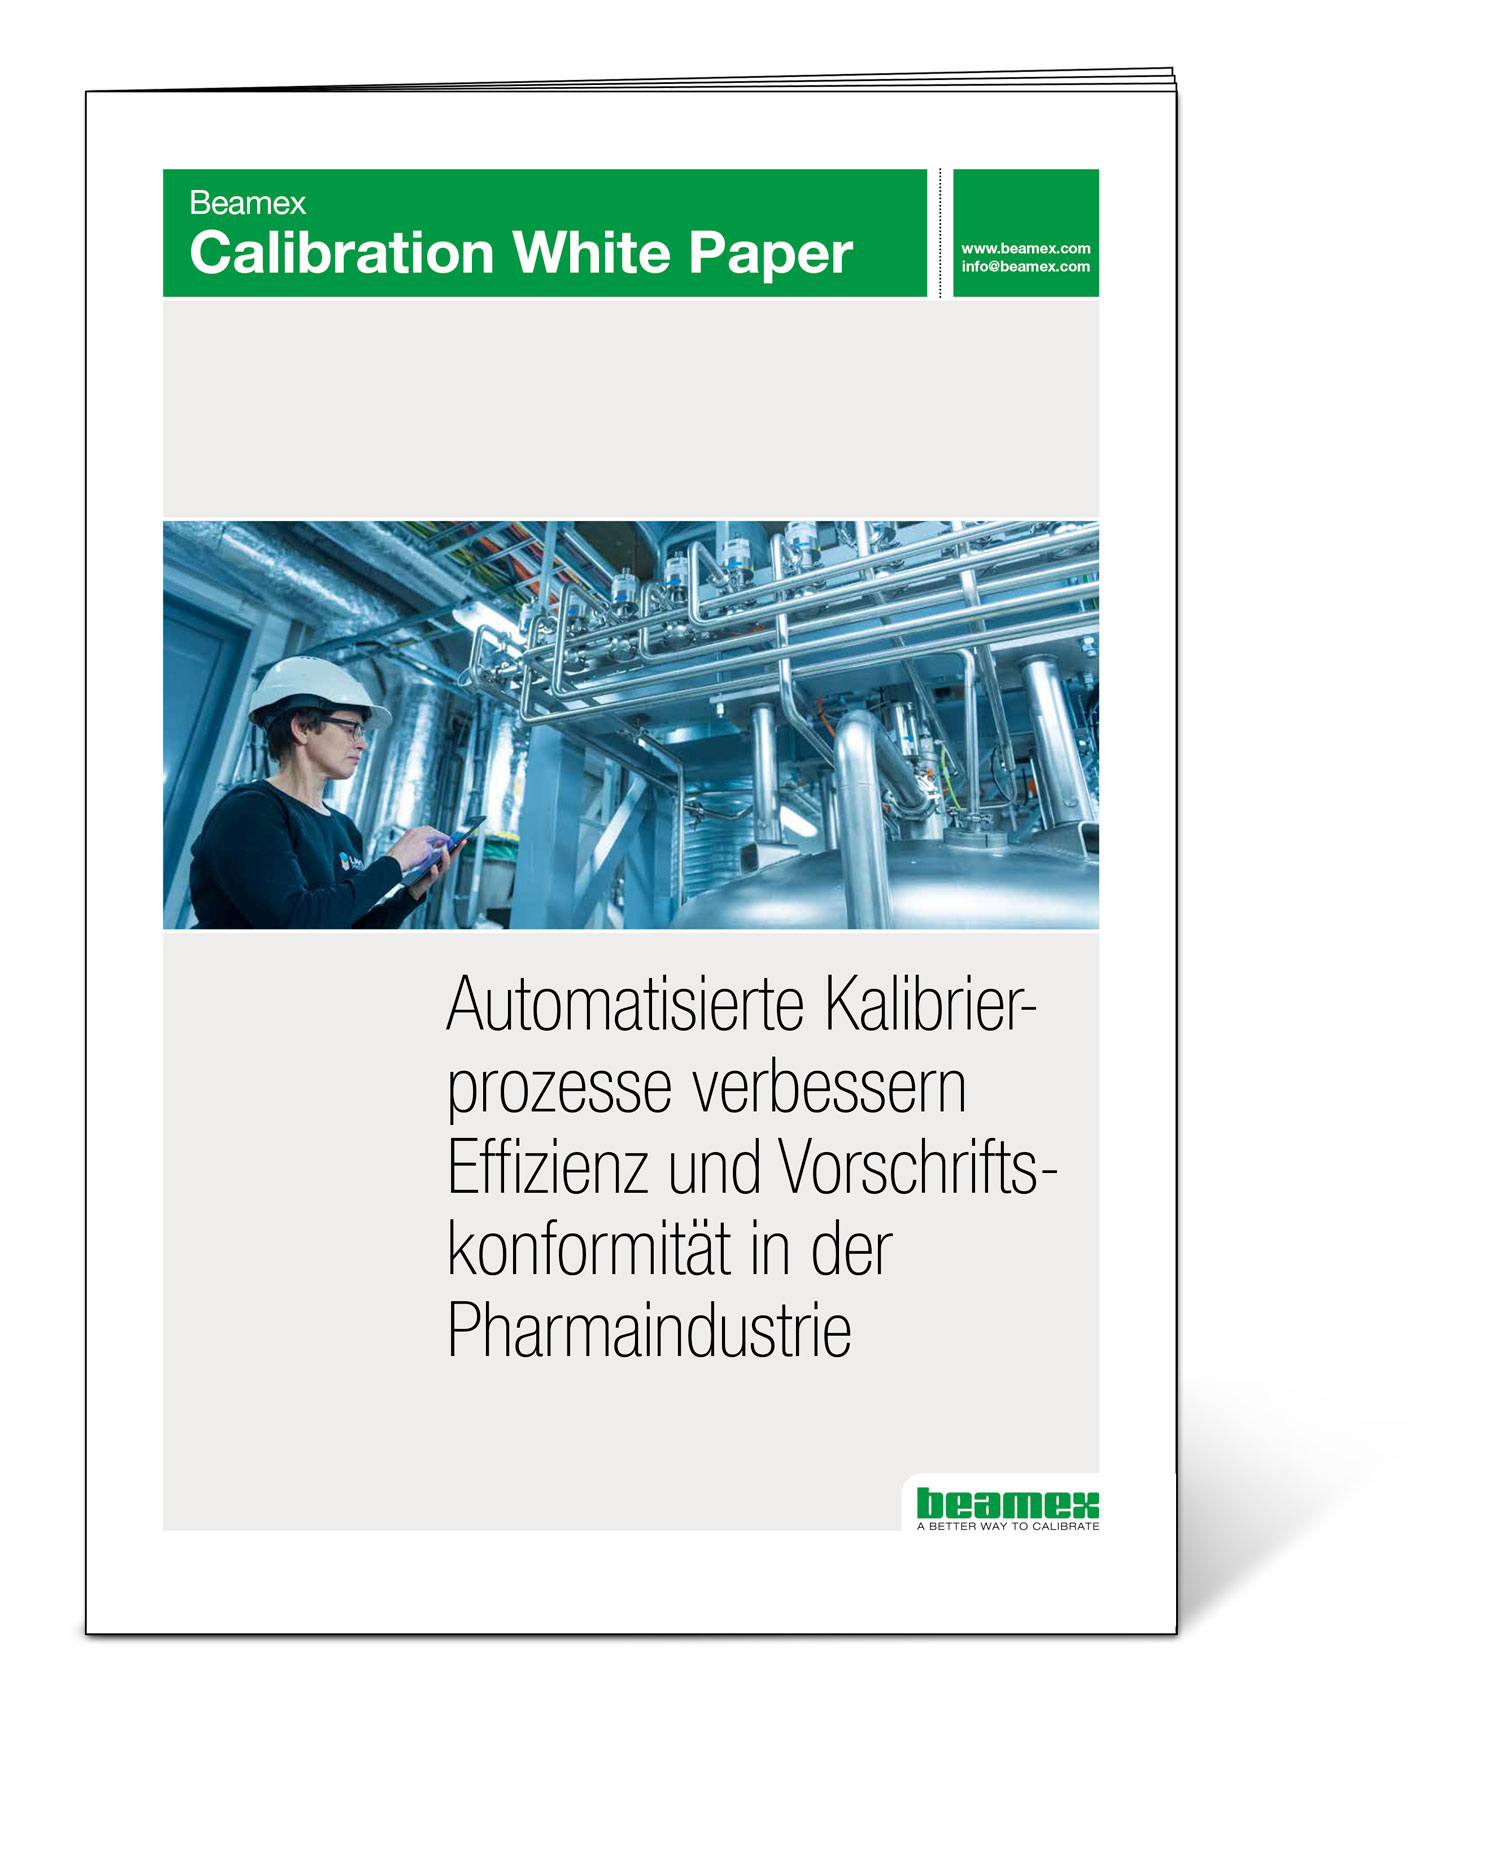 https://2203666.fs1.hubspotusercontent-na1.net/hubfs/2203666/Beamex_images/White%20Paper%20covers/Beamex-WP-Automated-calib-process-in-pharma-1500px-v1_GER.jpg